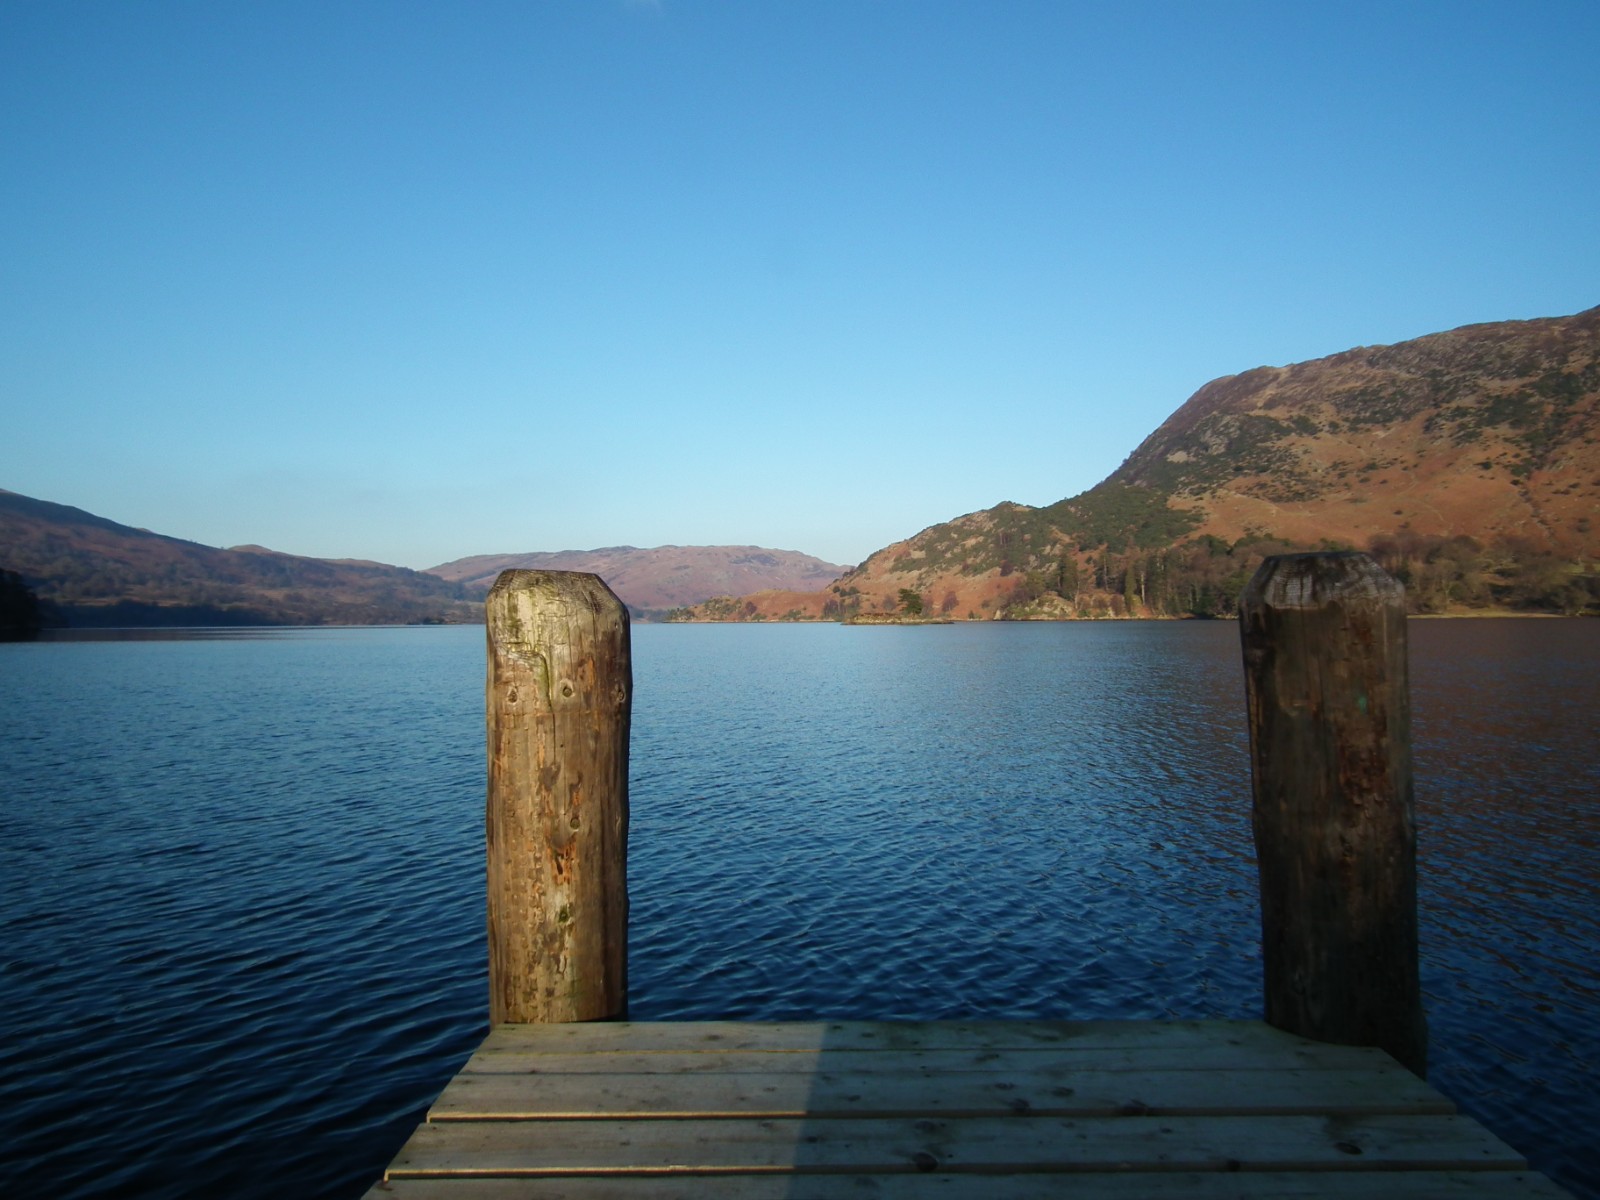 Ullswater tranquility